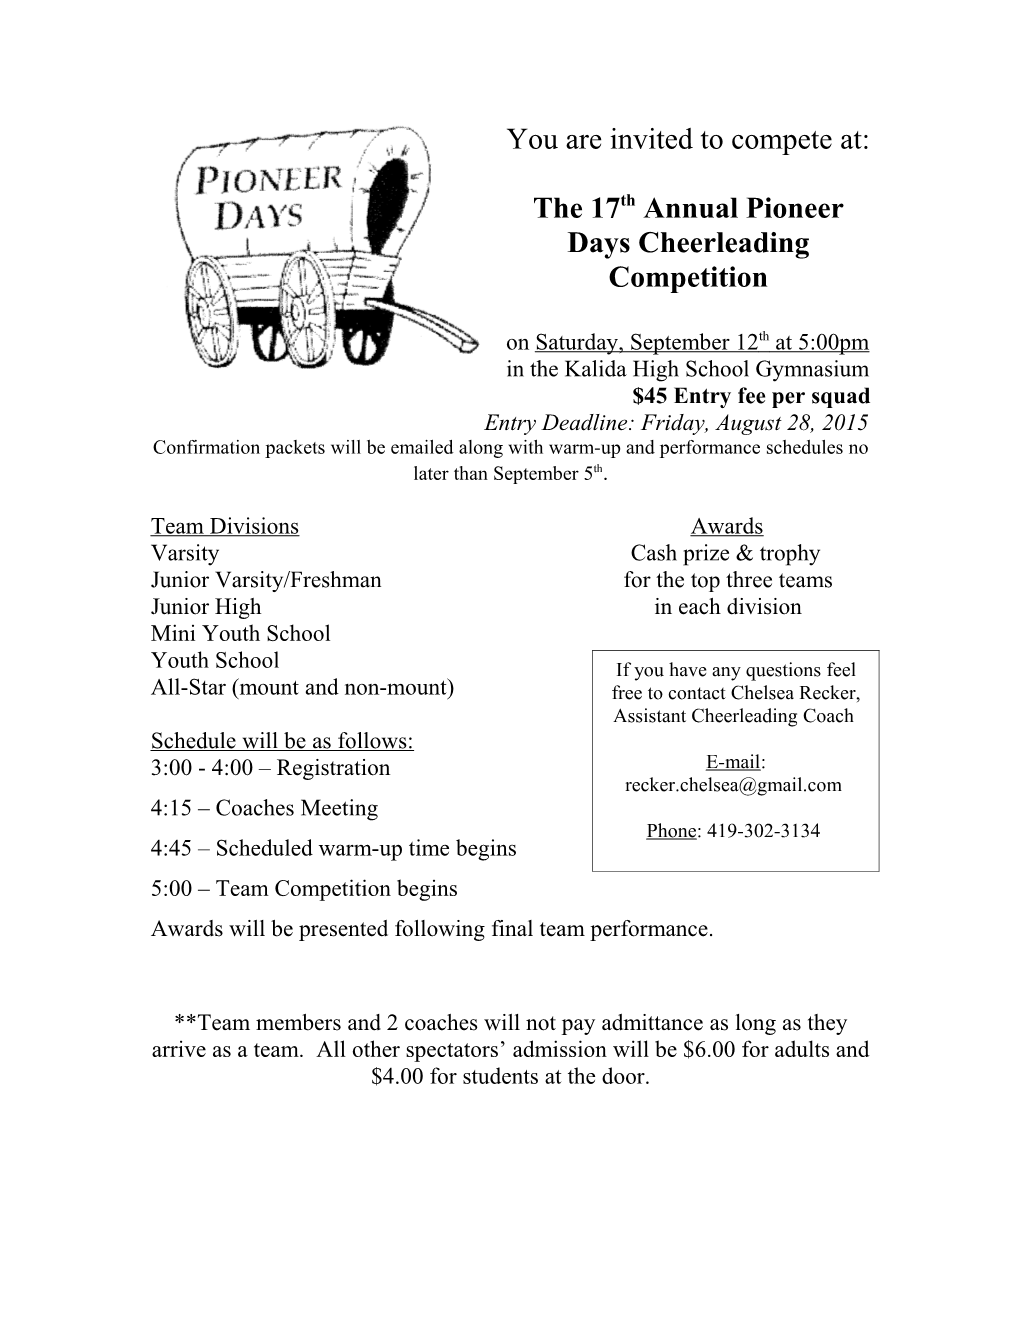 The 17Th Annual Pioneer Days Cheerleading Competition